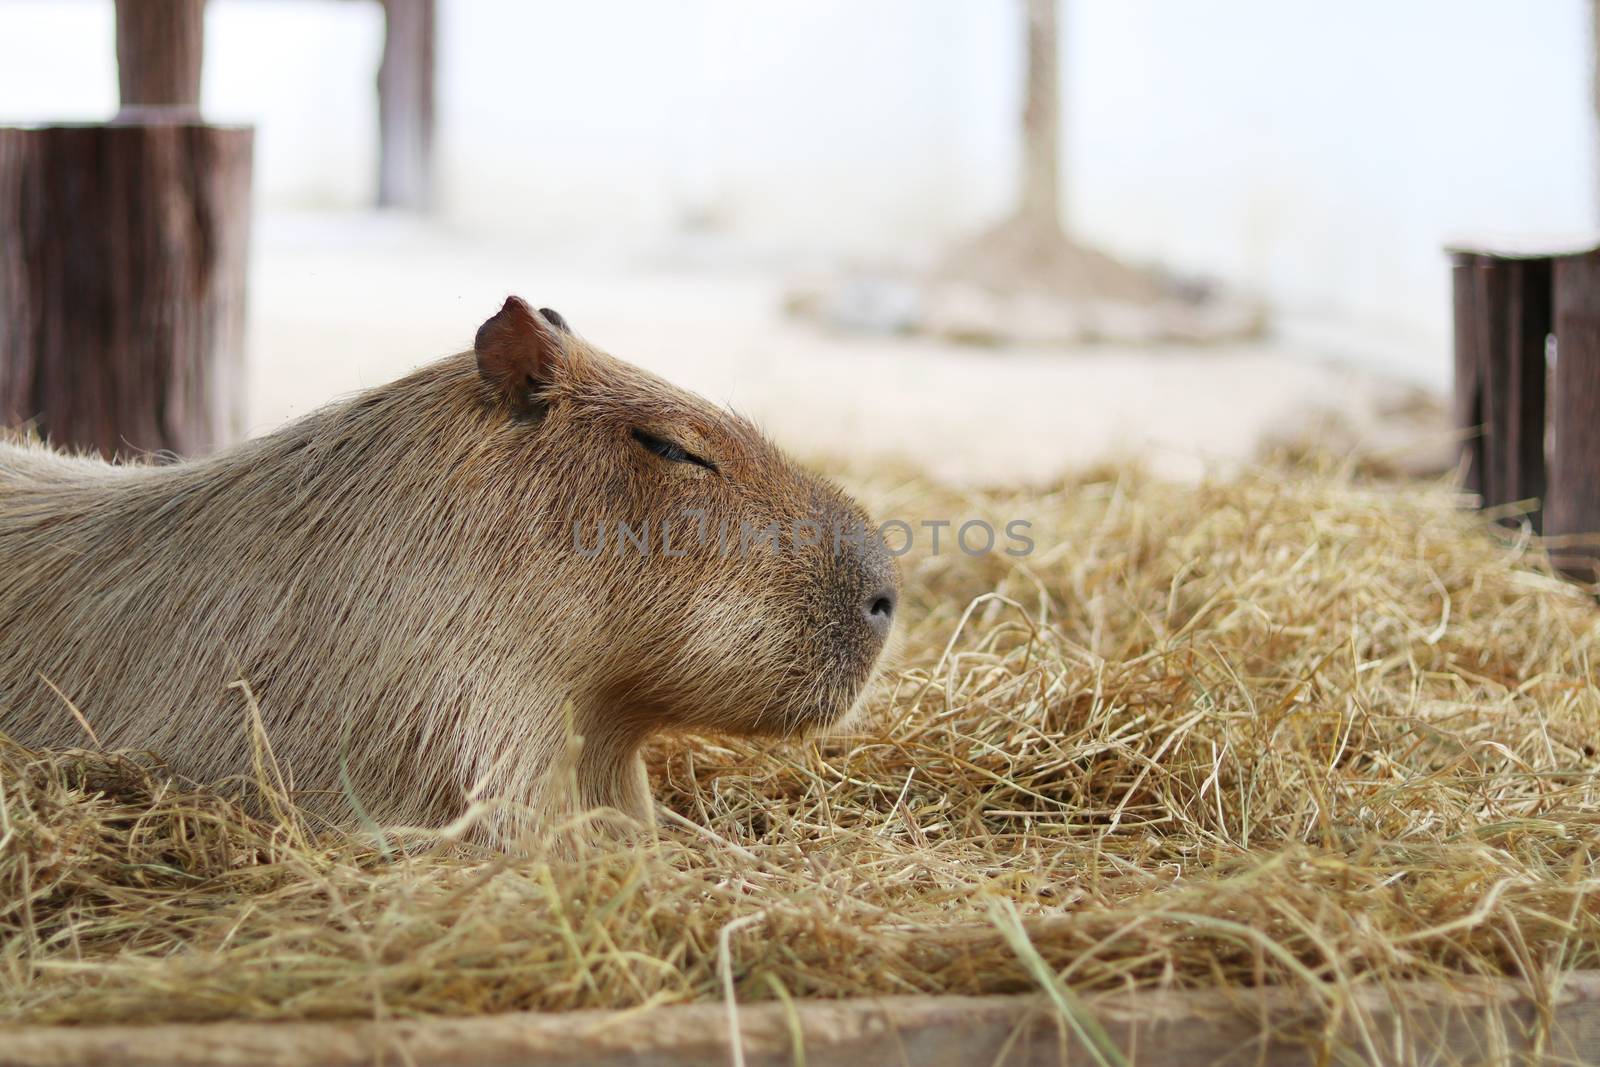 Capybara sat with eyes closed on the straw. by Eungsuwat